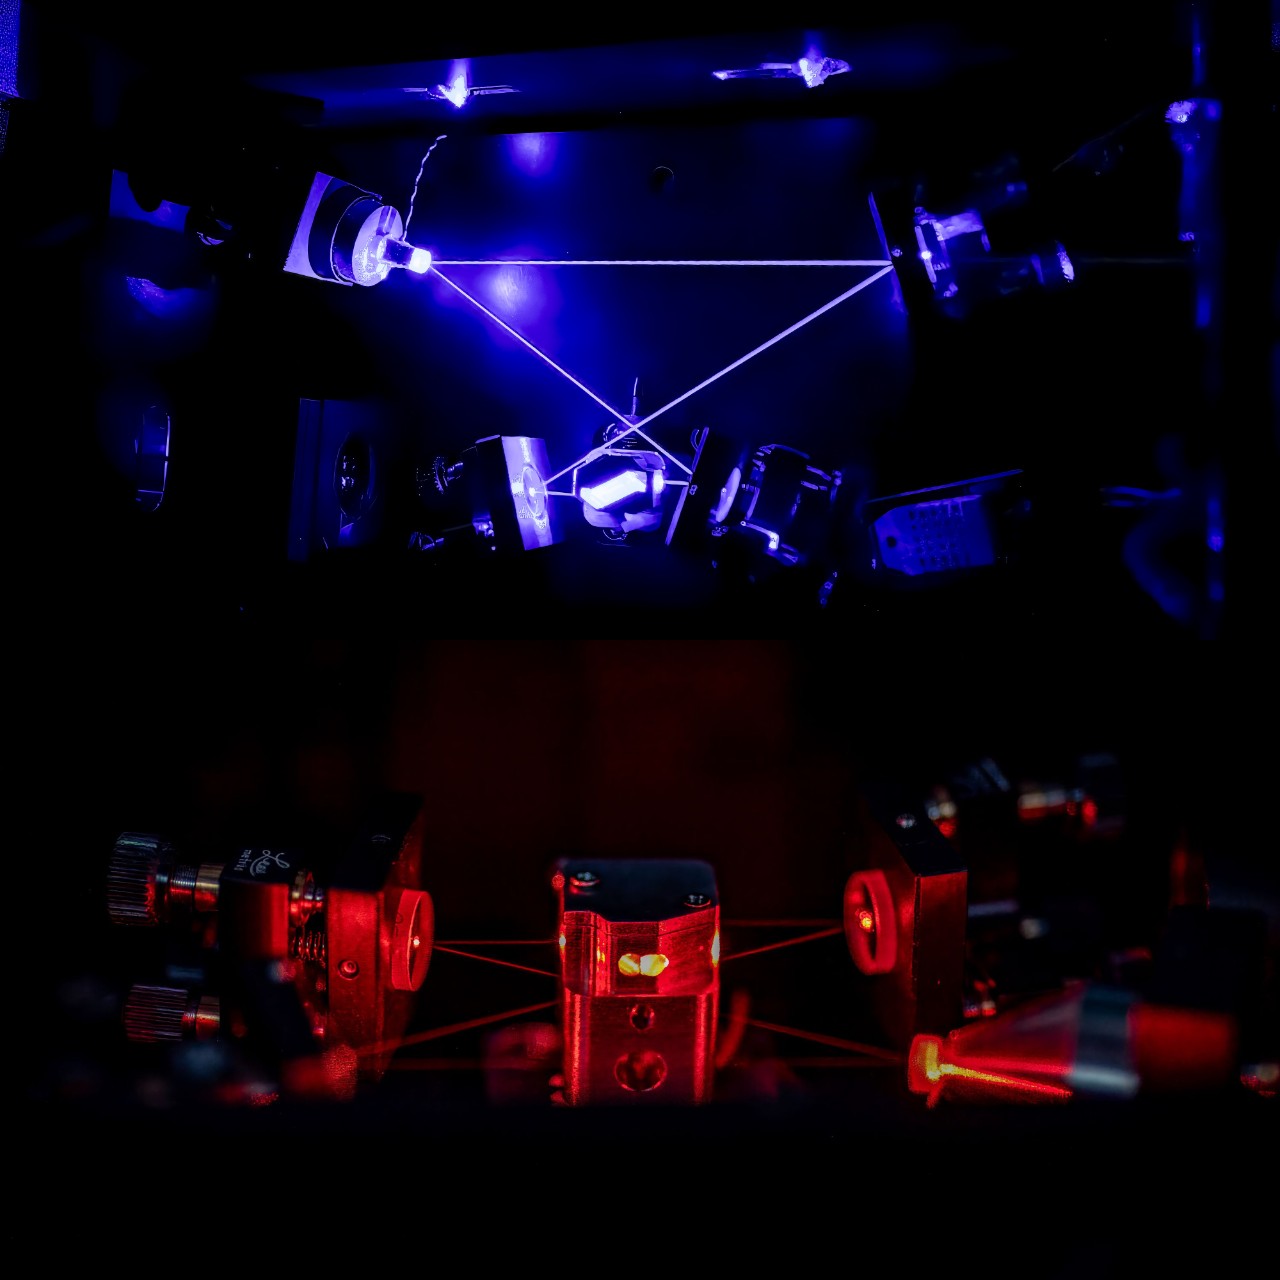 Two images of lazers set ups in a dark box, a lazer beam shooting and refracting across various angled plates. The top one is a blue lazer, the bottom red.